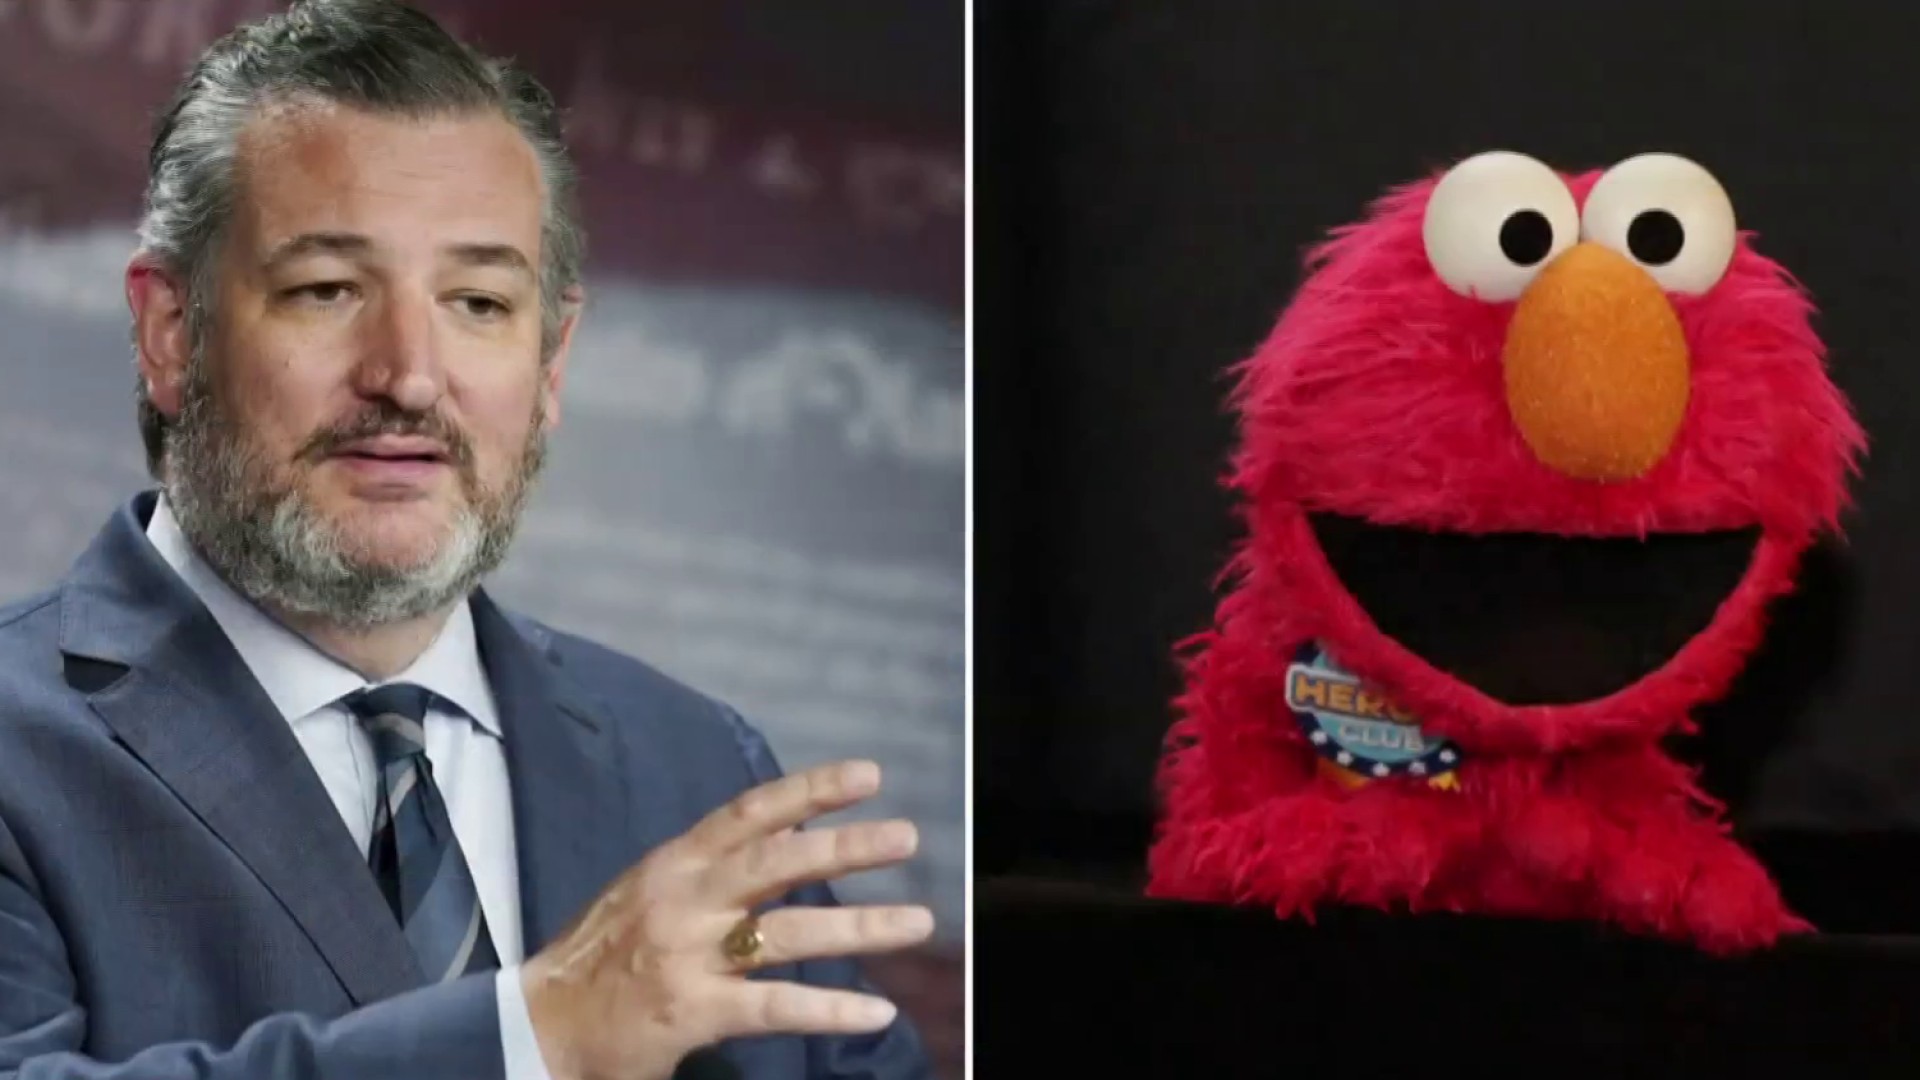 Ted Cruz feuds with Elmo over PSA for toddler Covid vaccines - fact checked here with Dr. Kavita Patel